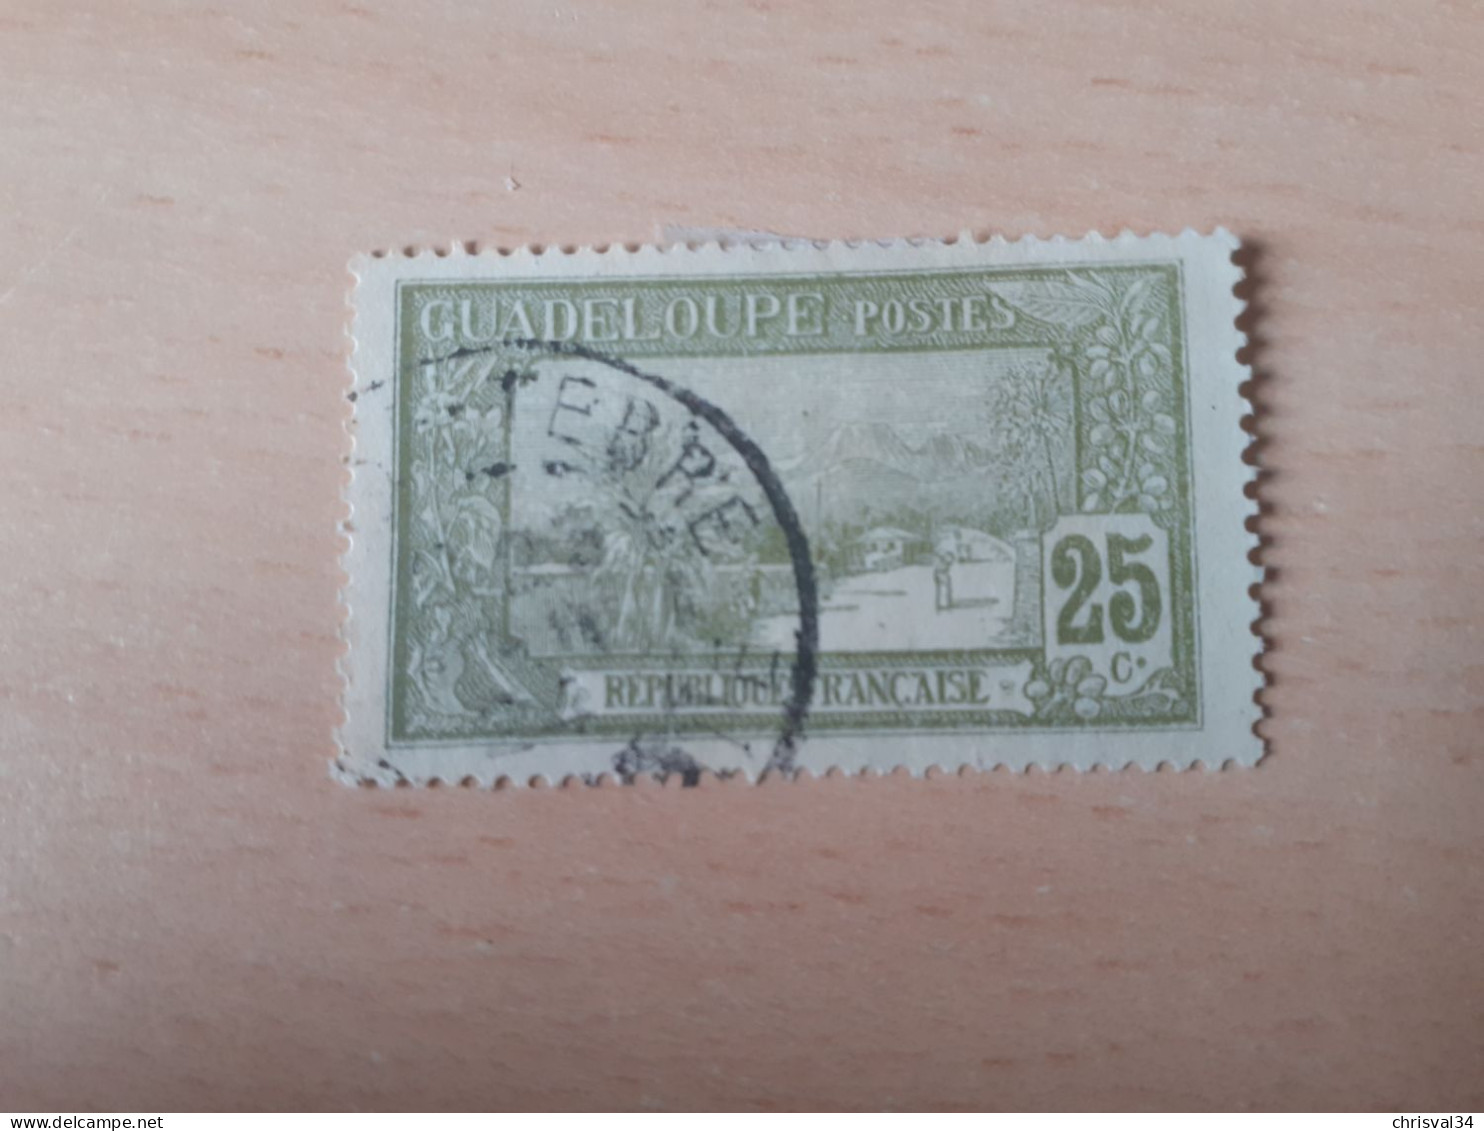 TIMBRE   GUADELOUPE       N  81     COTE  0,75   EUROS  OBLITERE - Used Stamps